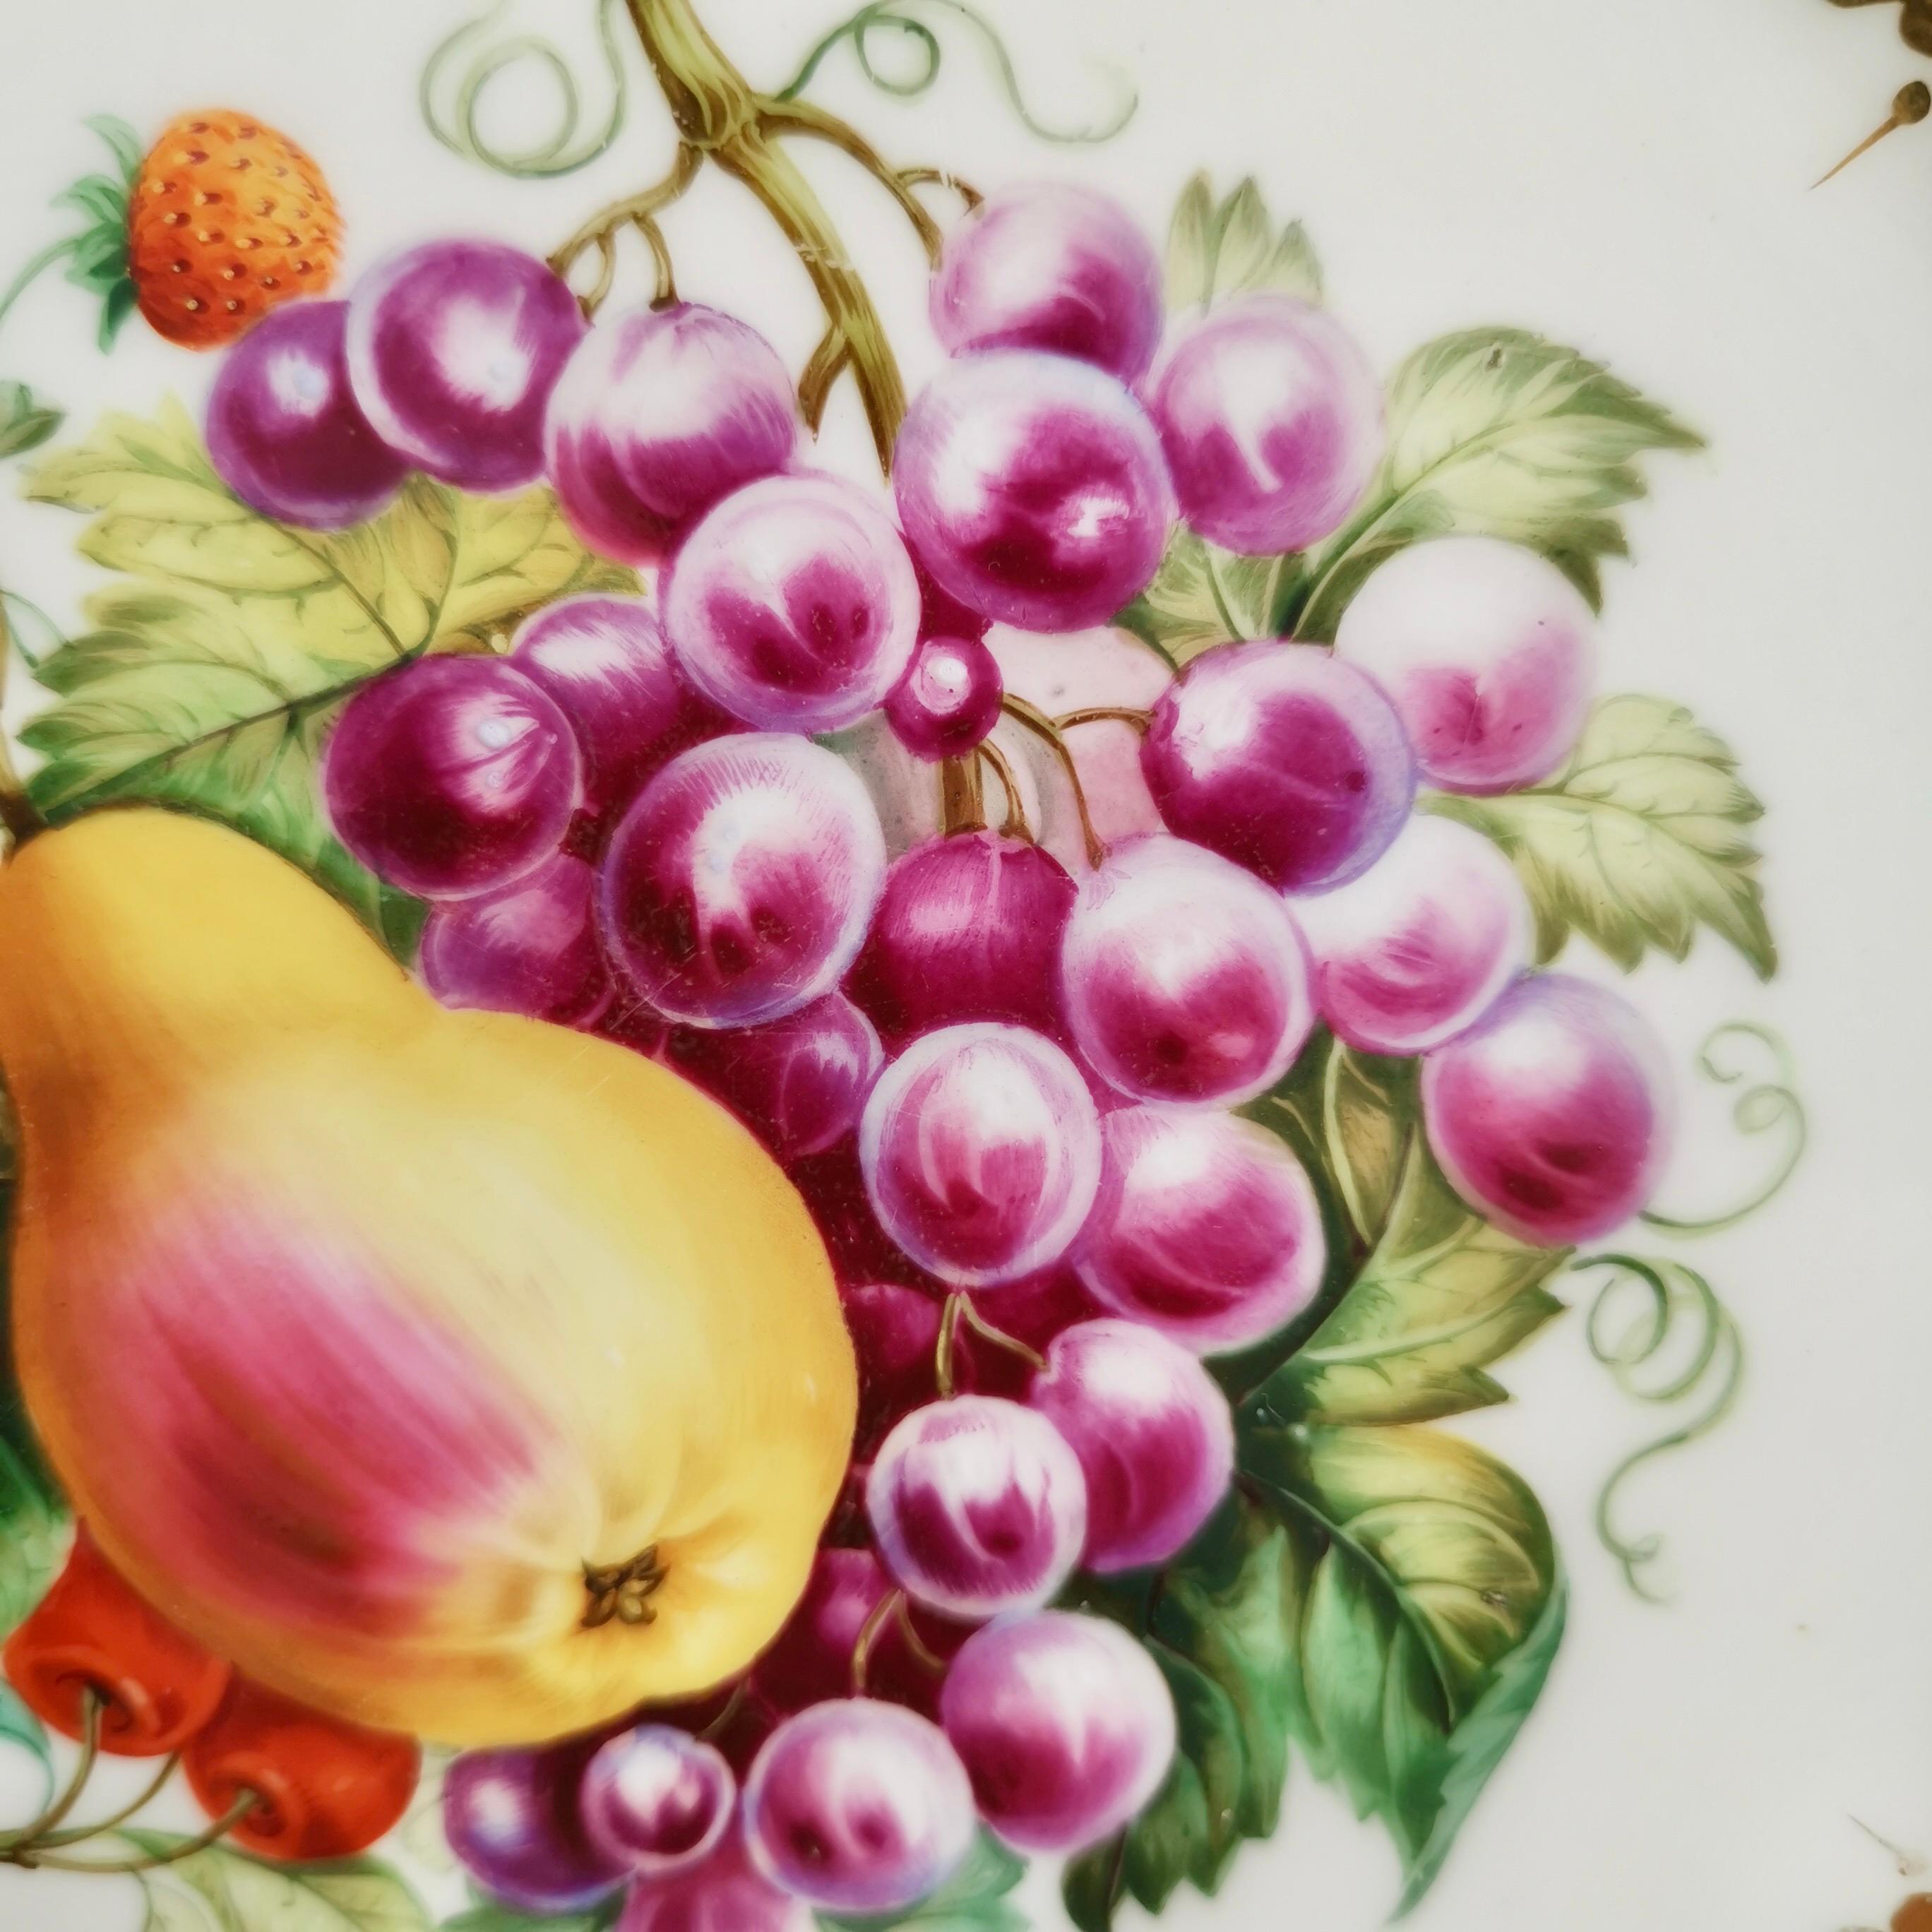 Mid-19th Century Ridgway Plate, Emerald Green, Gilt and Sublime Hand Painted Fruits, ca 1853